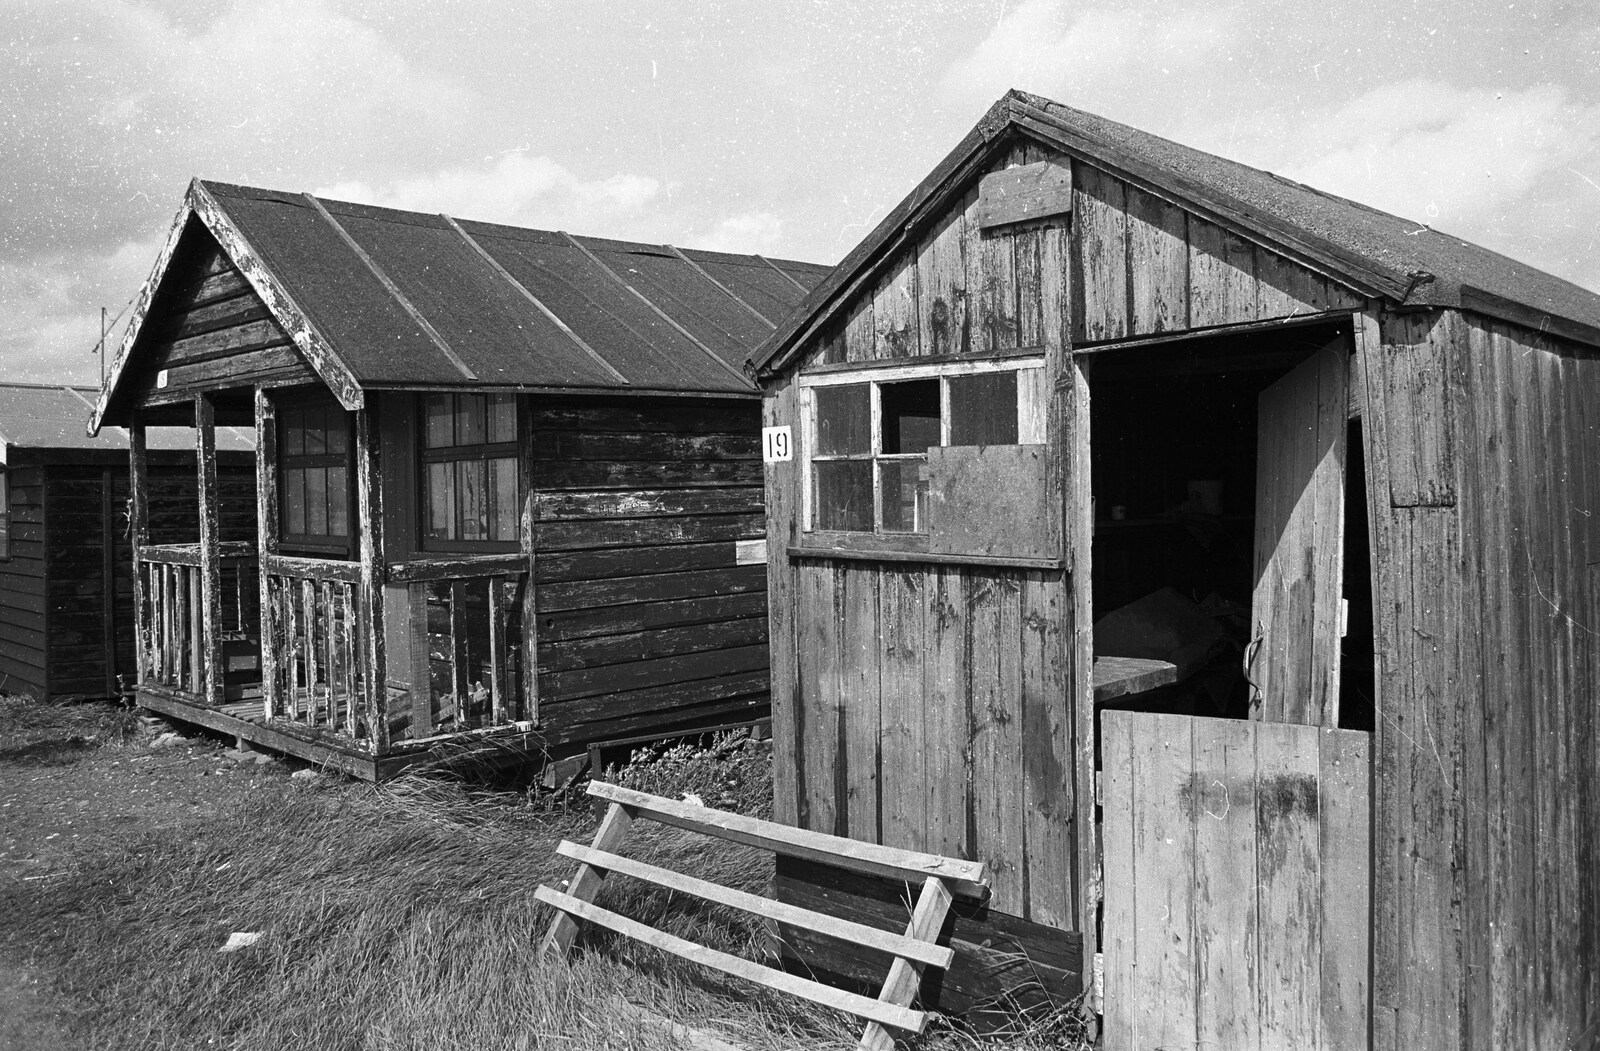 Blackshore Quay in Black and White, Southwold and Sizewell, Suffolk - 16th September 1992: Derelict huts